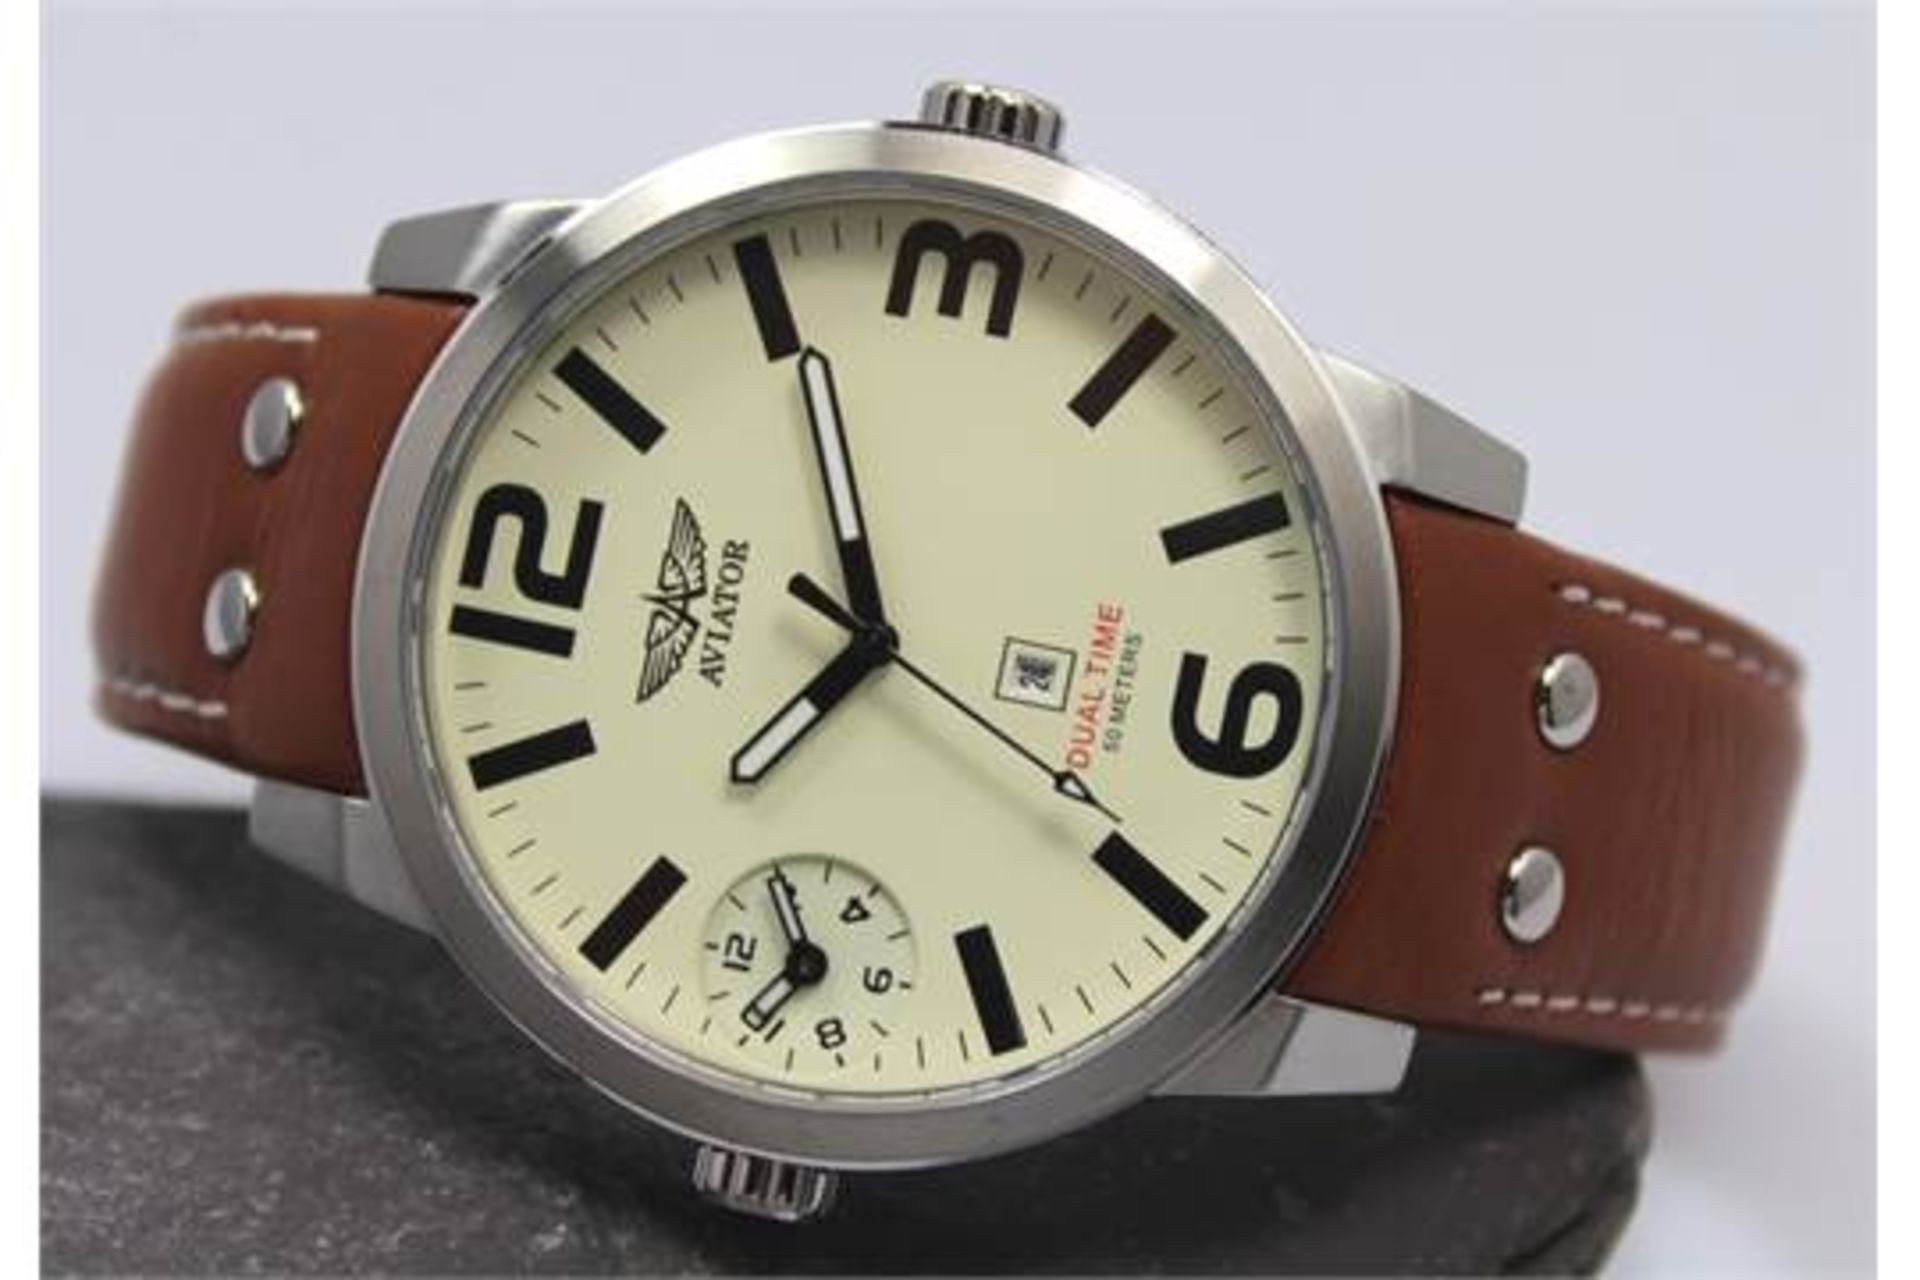 Aviator Men's Stainless Steel Dual Time Watch With Brown Leather Strap - Brand New In Aviator Gift